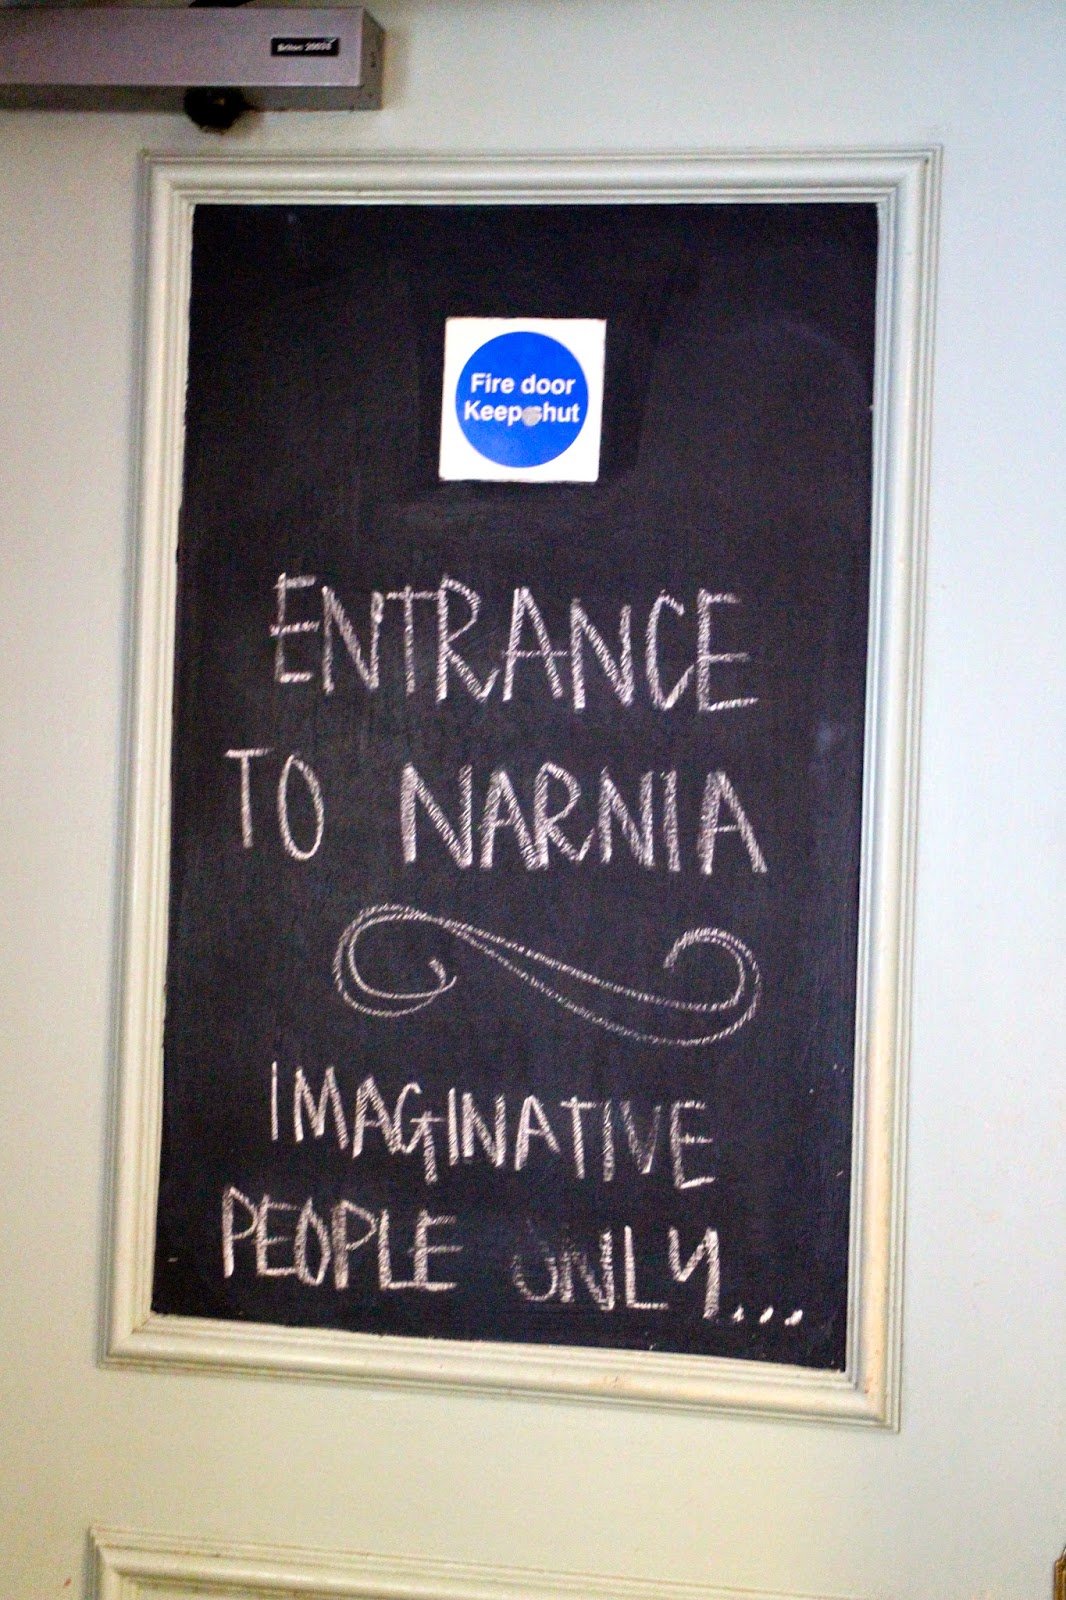 Entrance to Narnia. Imaginative people only.